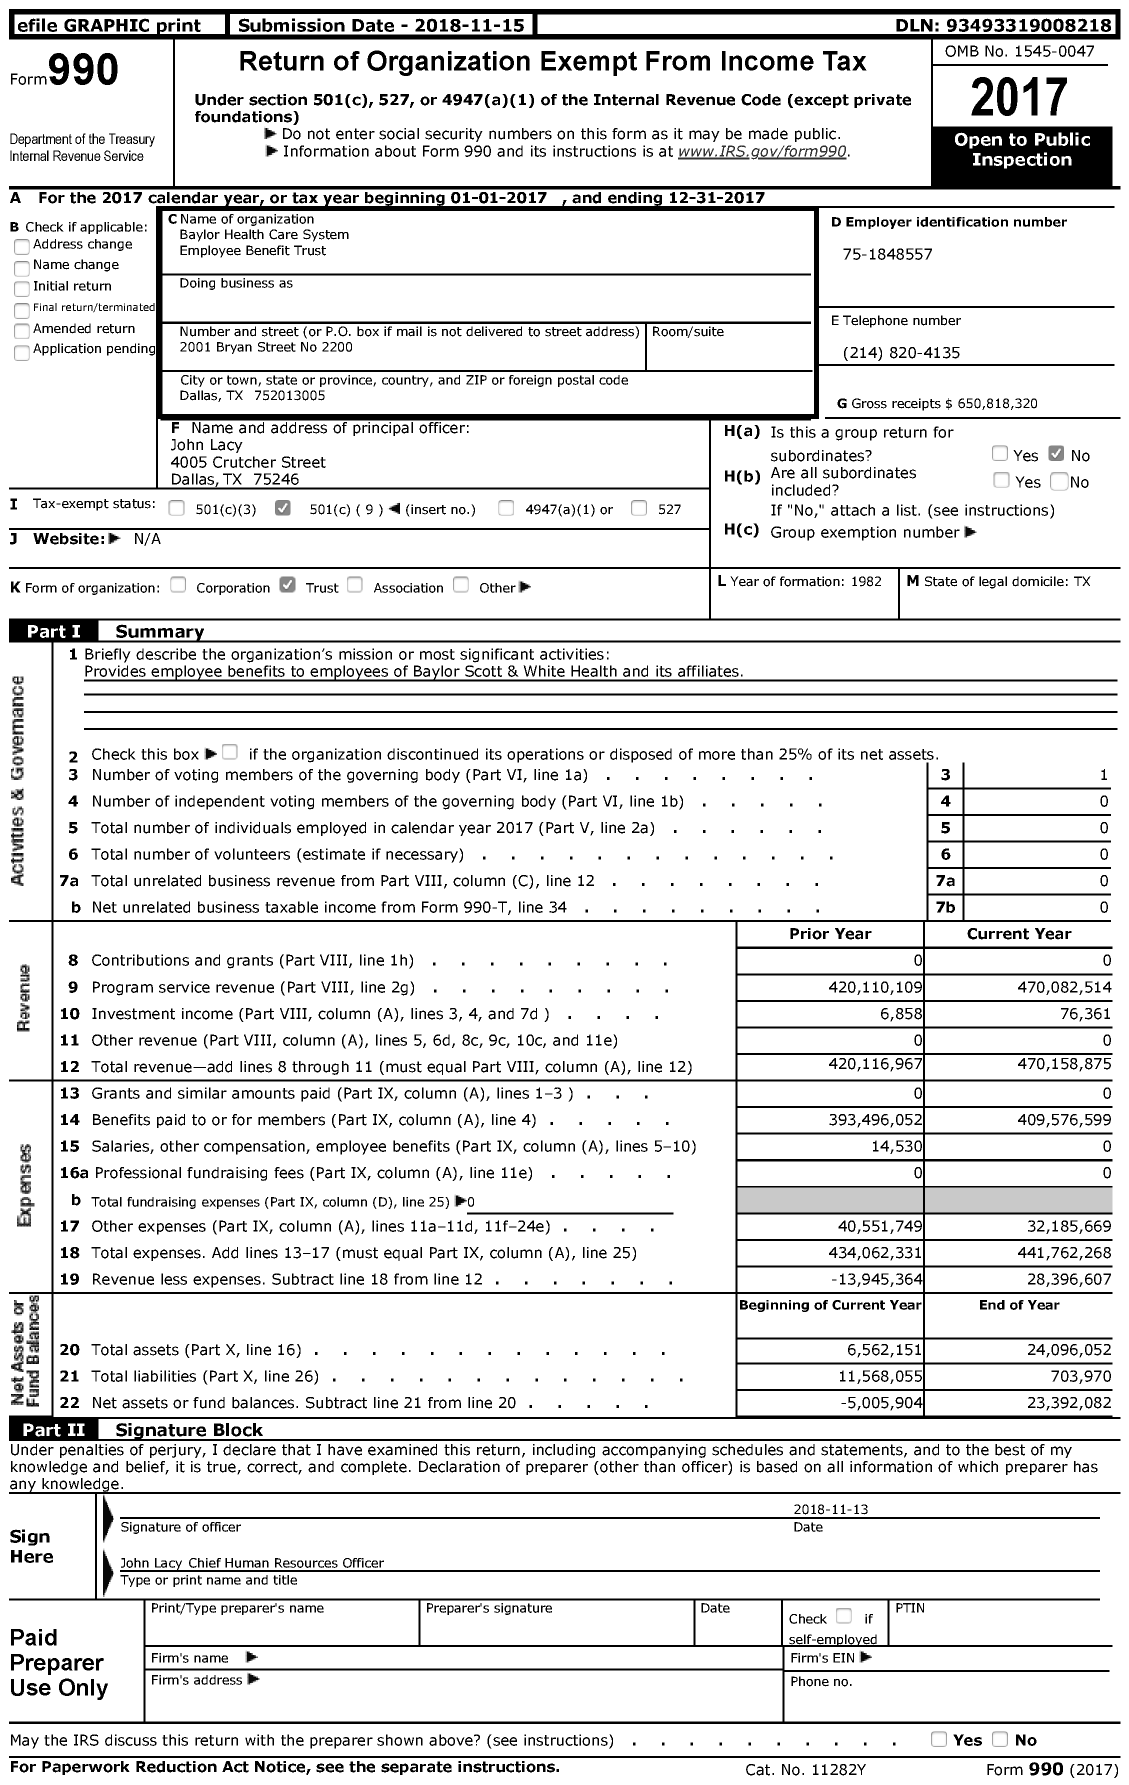 Image of first page of 2017 Form 990 for Baylor Health Care System Employee Benefit Trust